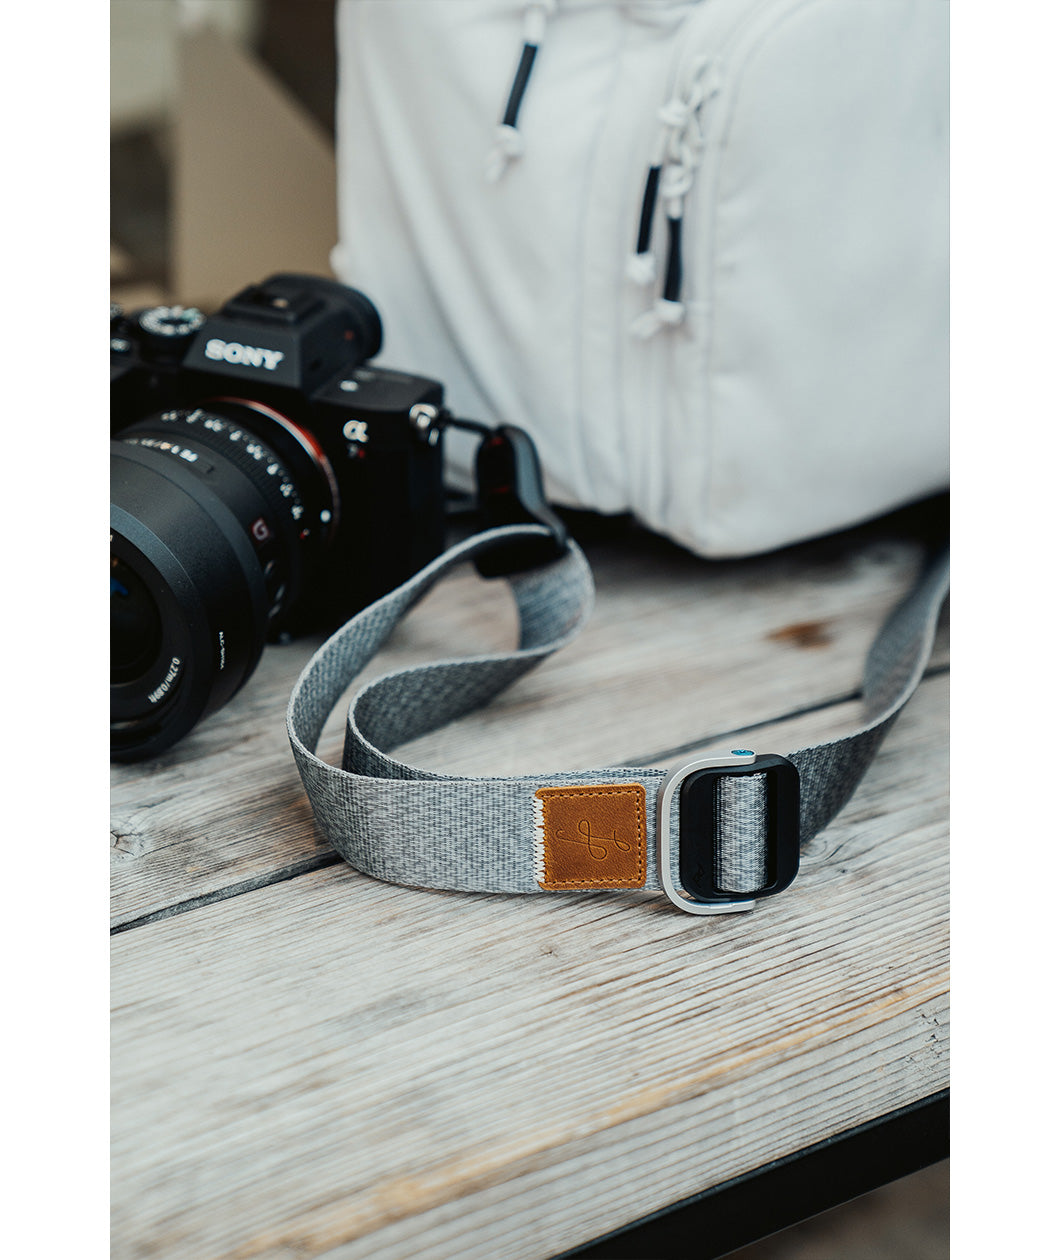 A close up of a grey camera strap attached to a camera with a brown leather square that has a "LP" etched into it for Lizzie Peirce.